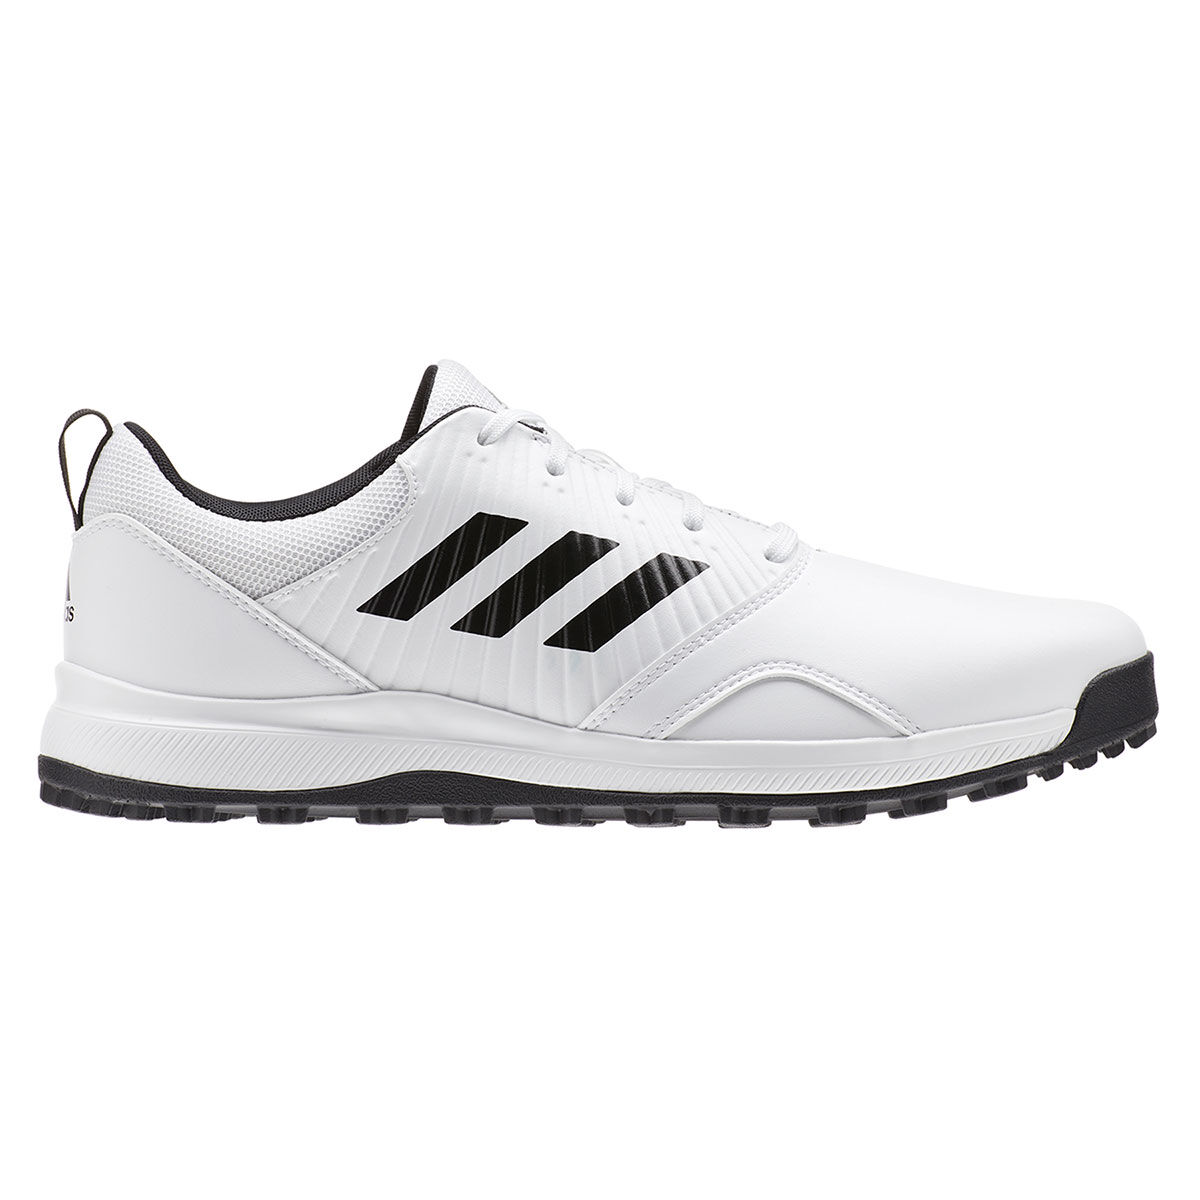 adidas golf traxion classic shoes